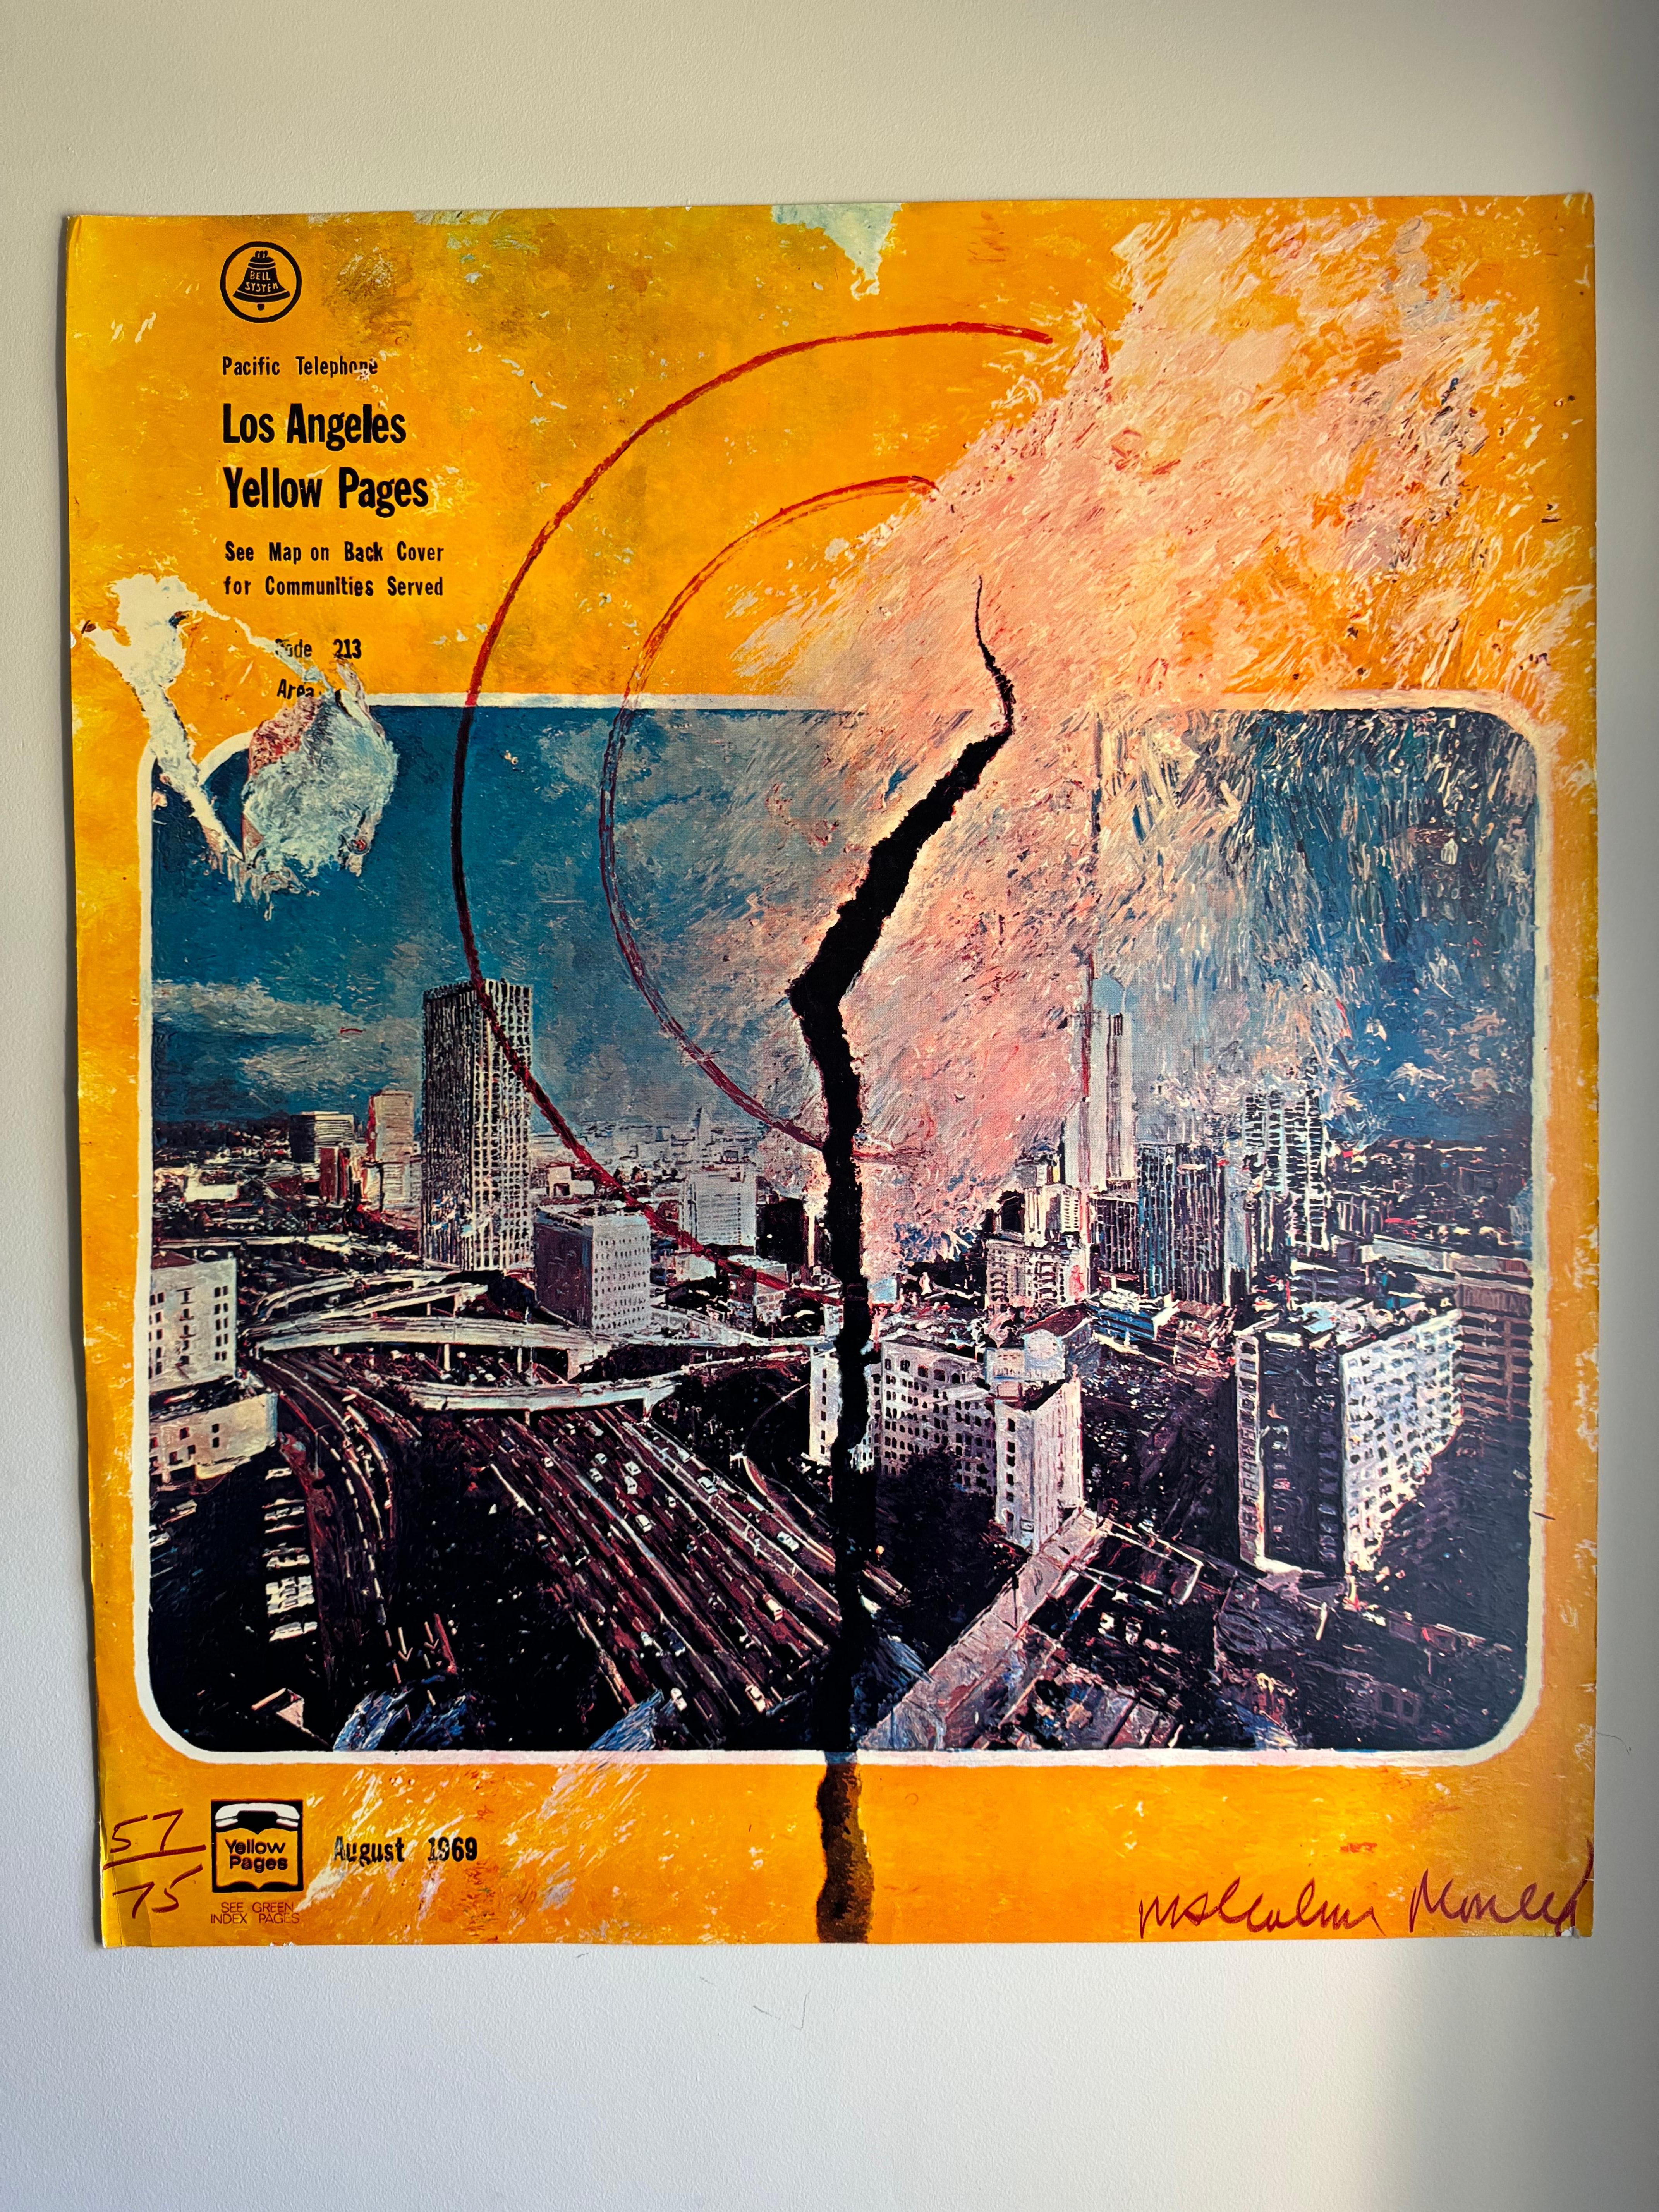 Gorgeous print for Pacific Telephone advertising the Los Angeles Yellow Pages. This print was designed by Malcolm Morley and published in 1969. This print is marked (57/75) and signed by the artist in plate.

Overall this print is in great condition